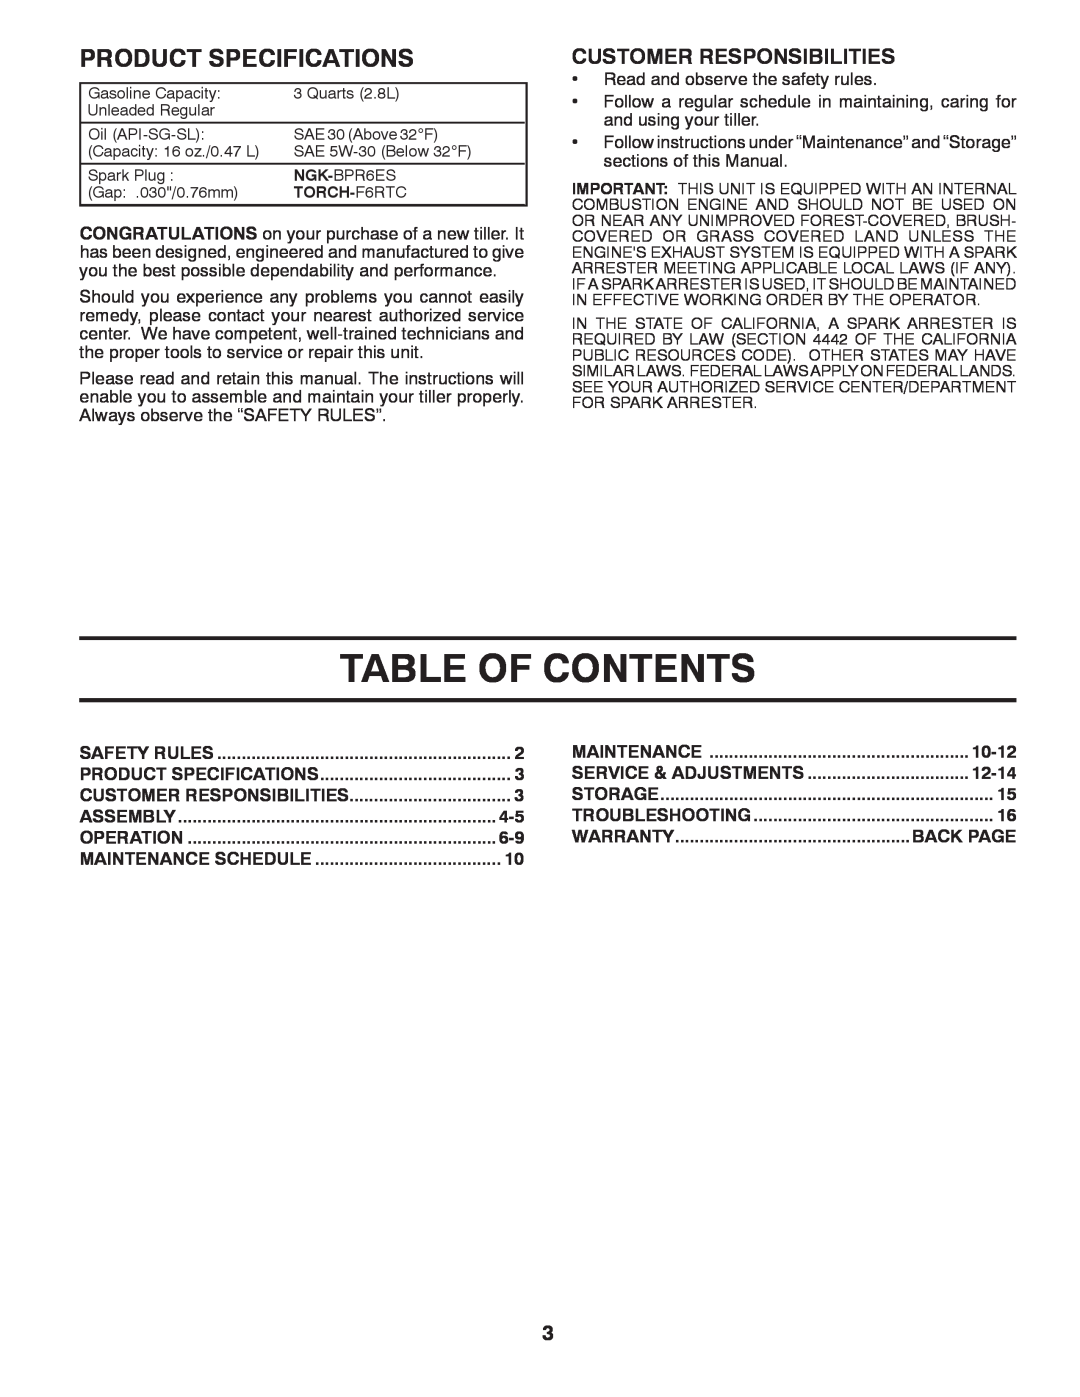 McCulloch 532 43 21-09 manual Table Of Contents, Product Specifications, Customer Responsibilities, 10-12, 12-14, Back Page 